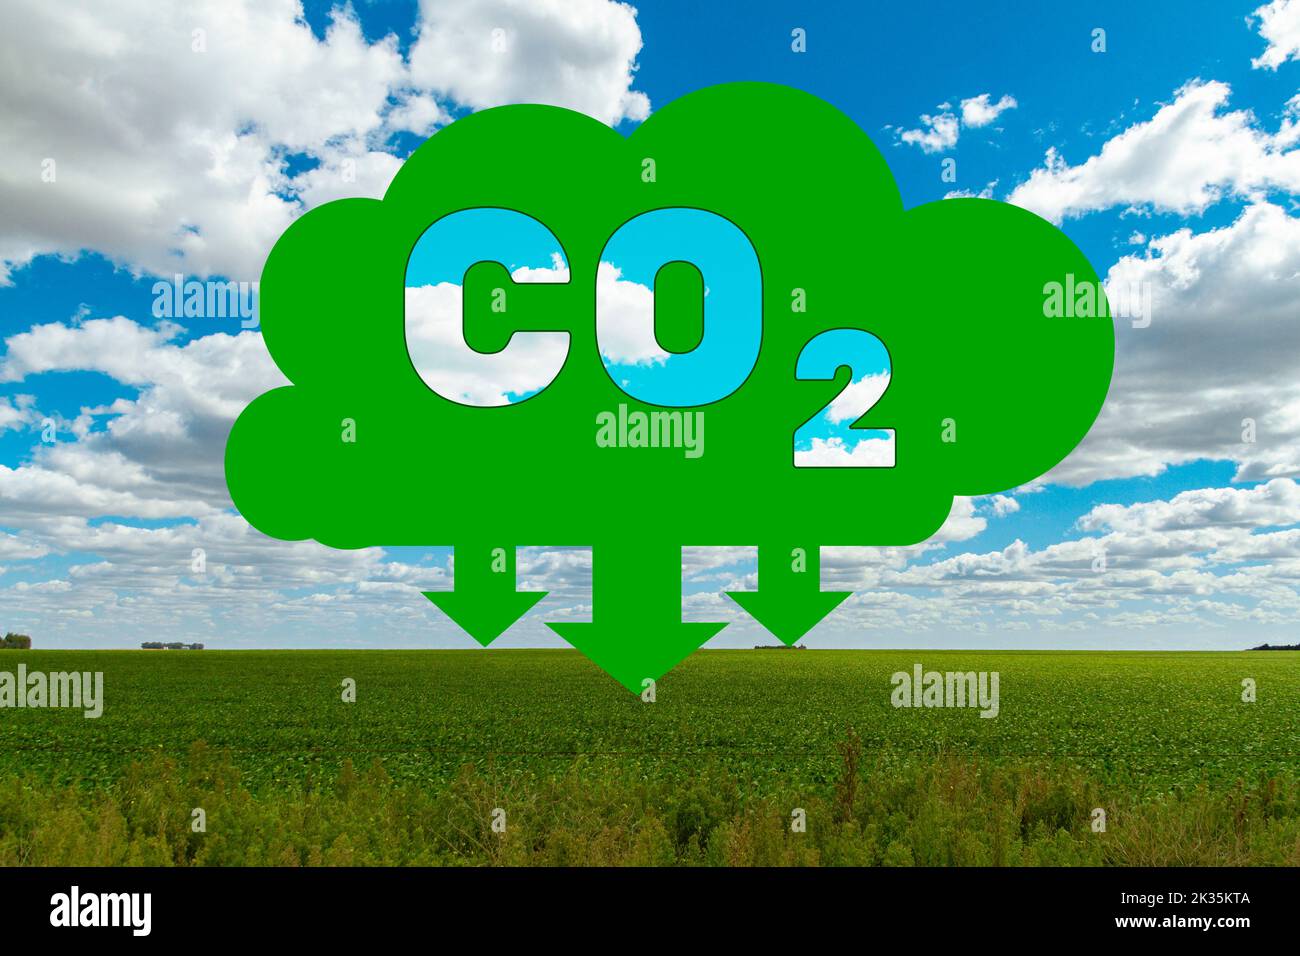 Drawing representing the absorption of carbon dioxide by the field. Concept of climate change, environmental care, atmosphere and pollution, science. Stock Photo